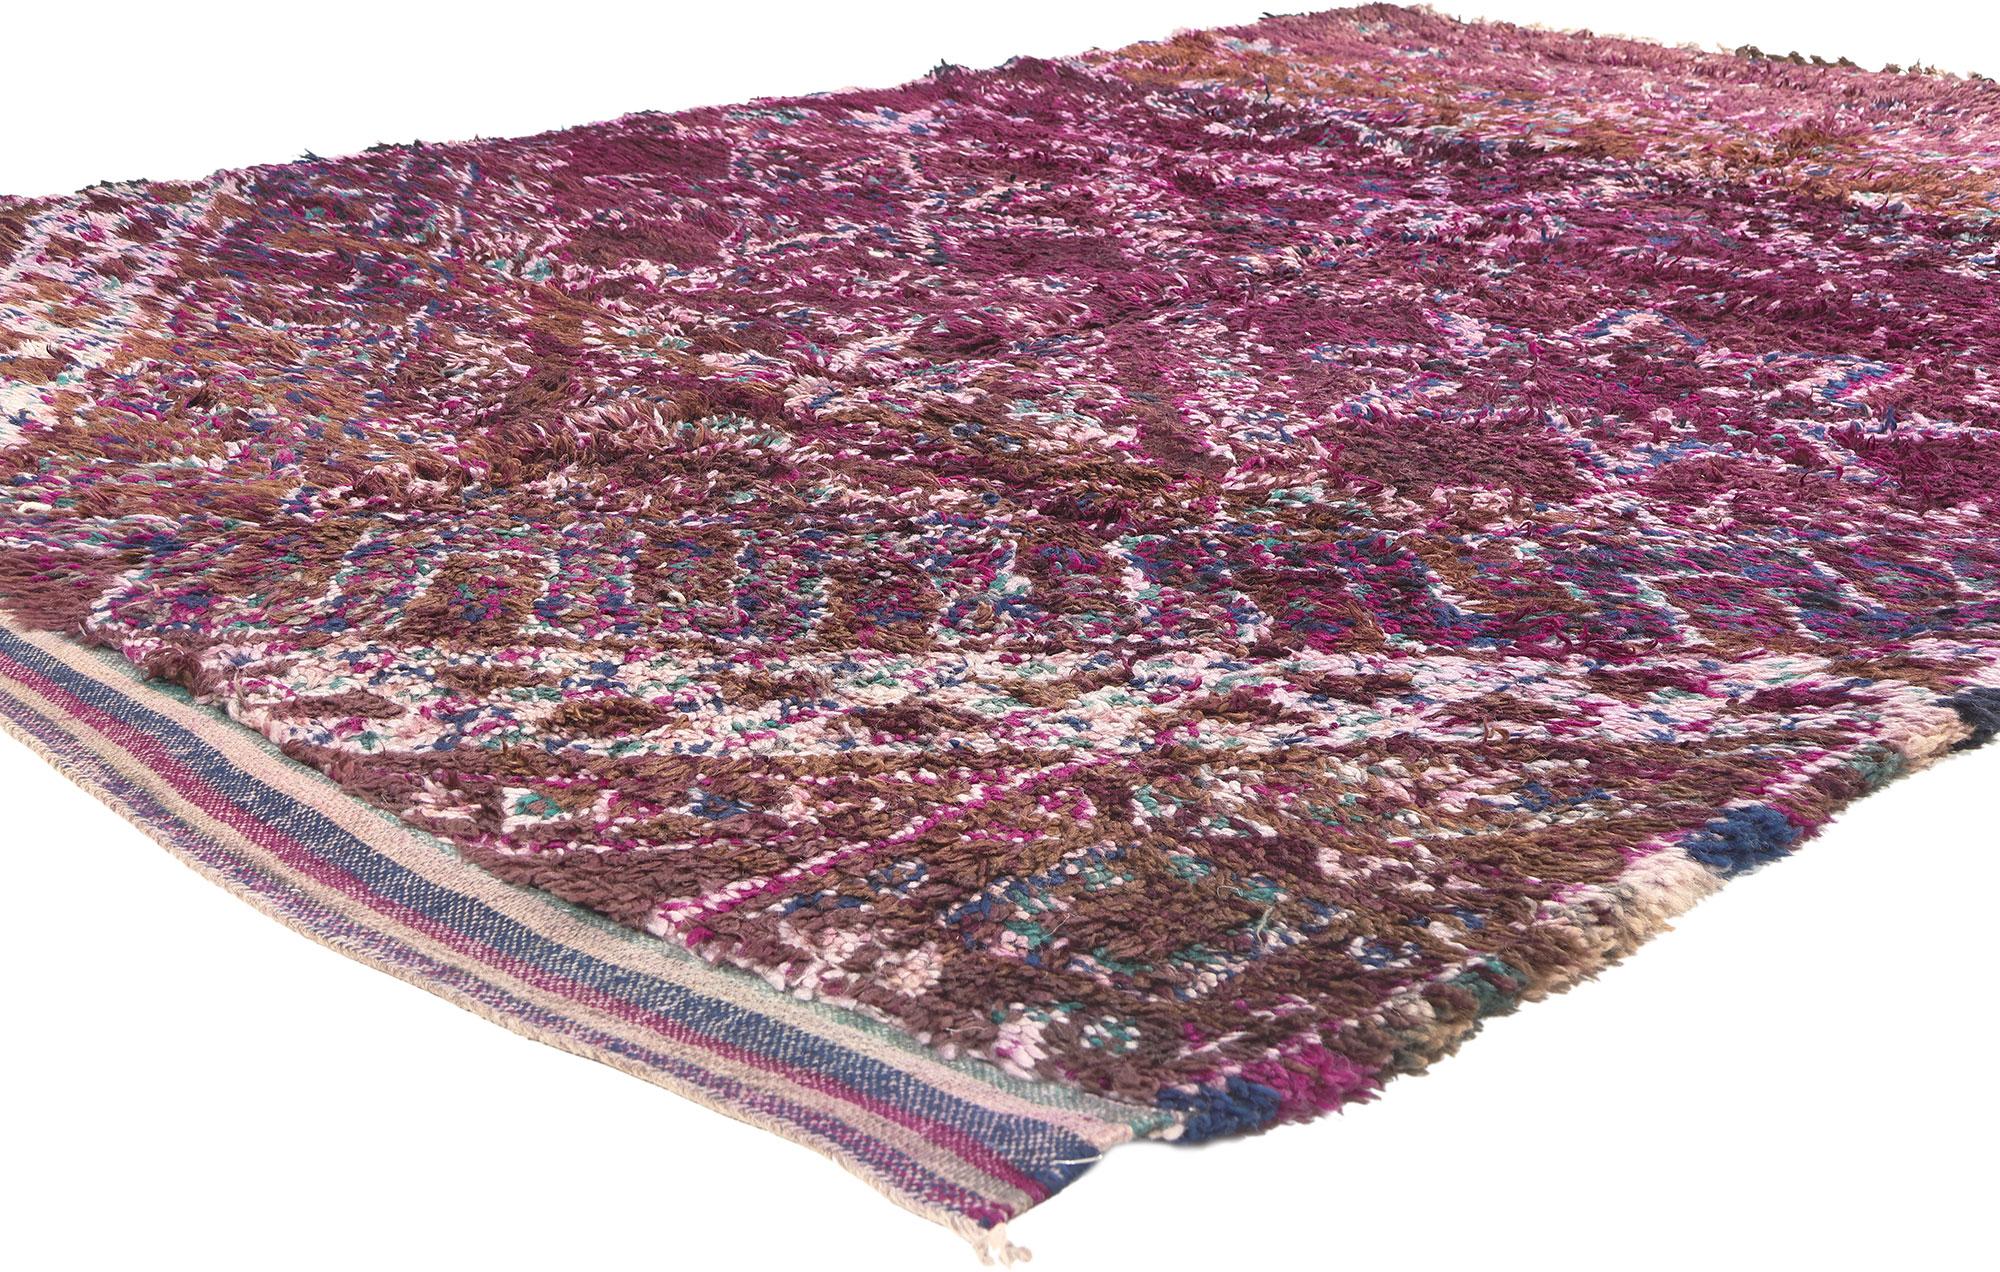 20779 Vintage Purple Beni MGuild Moroccan Rug, 06'00 x 09'06. 

In this luxuriously plush vintage Beni MGuild rug, a delightful fusion of Hygge vibes and Bohemian Tribal style unfolds. The sumptuous hand-knotted wool creates an inviting canvas for